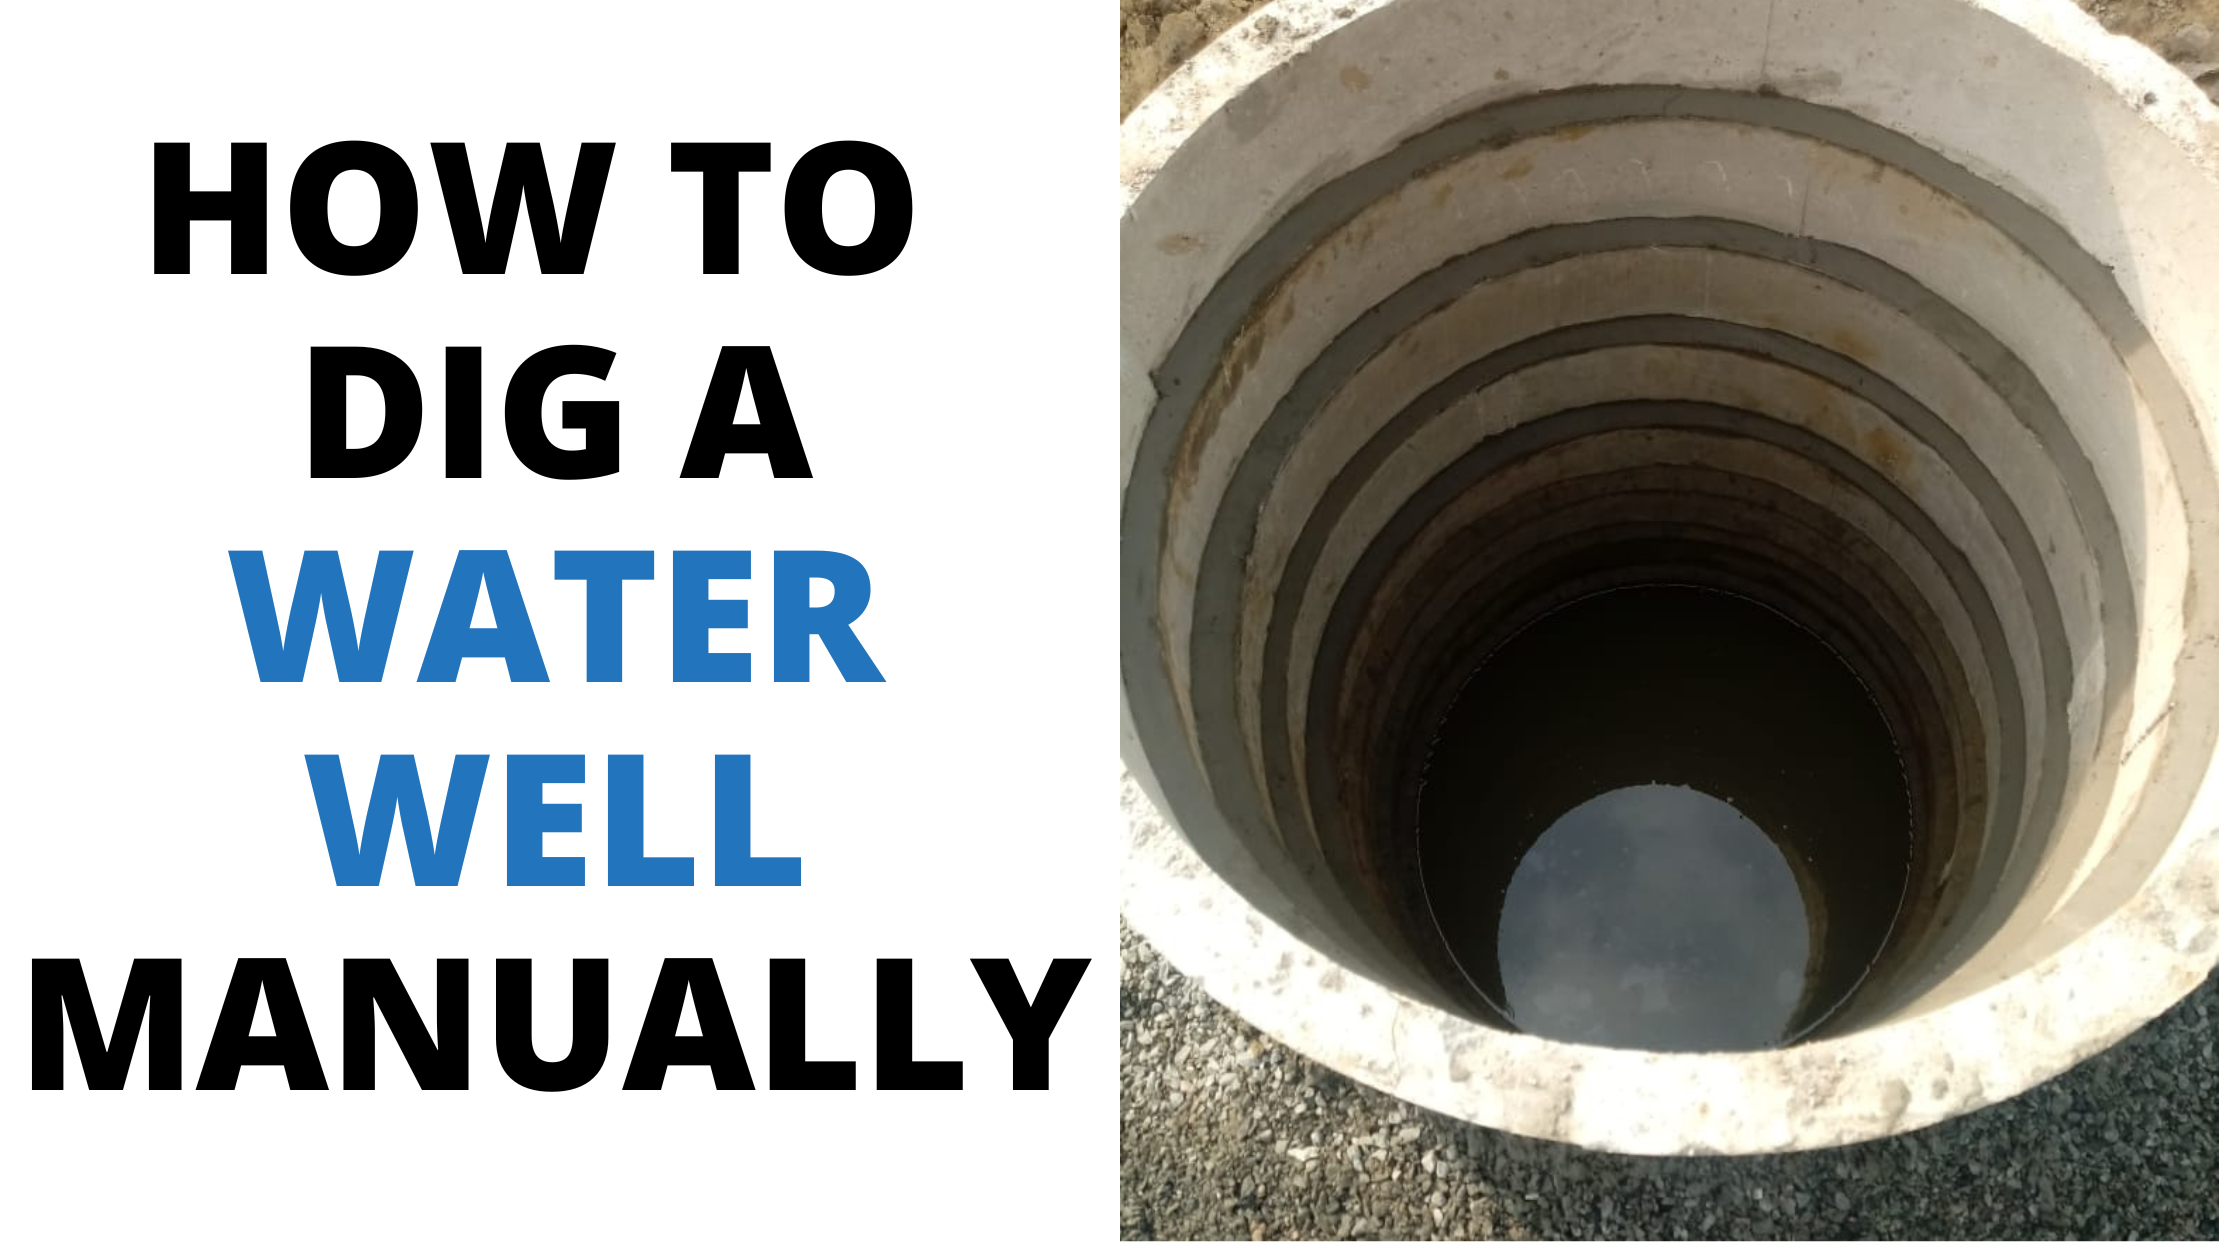 How to dig a water well manually